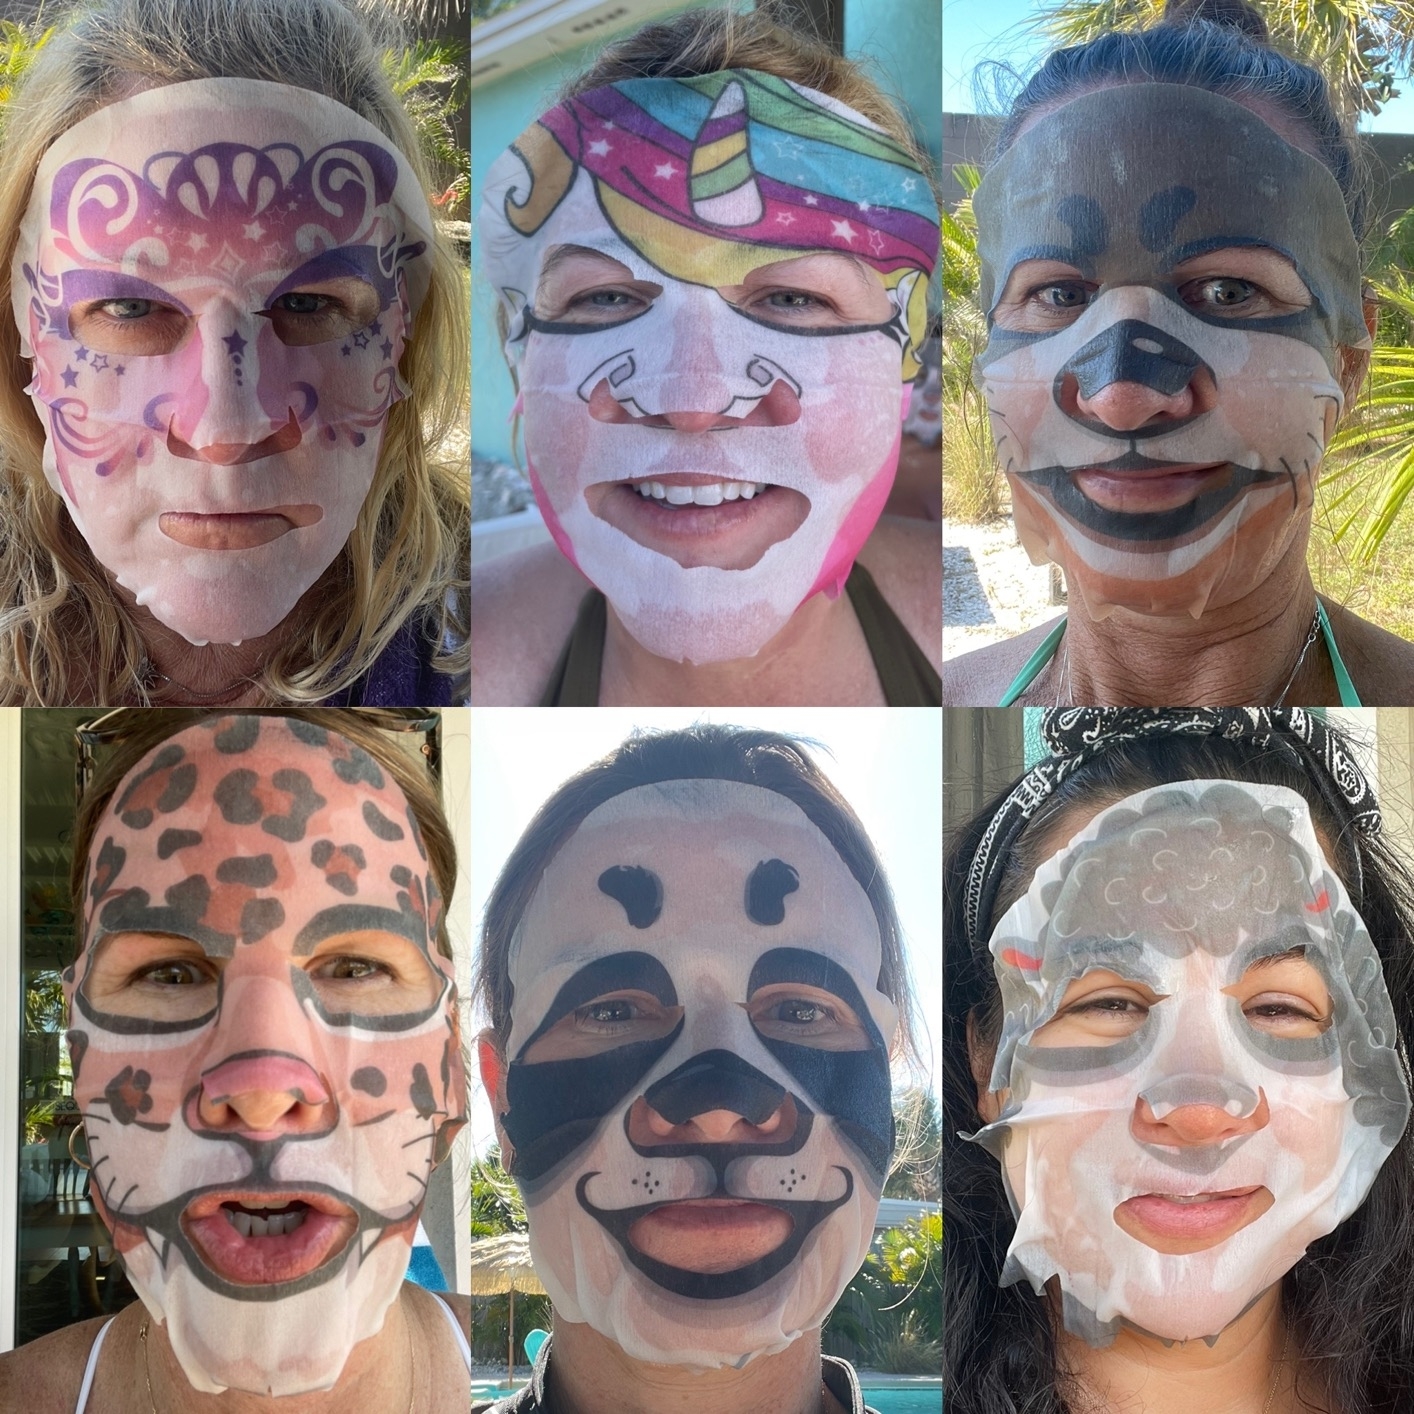 Reviewers in animal face masks